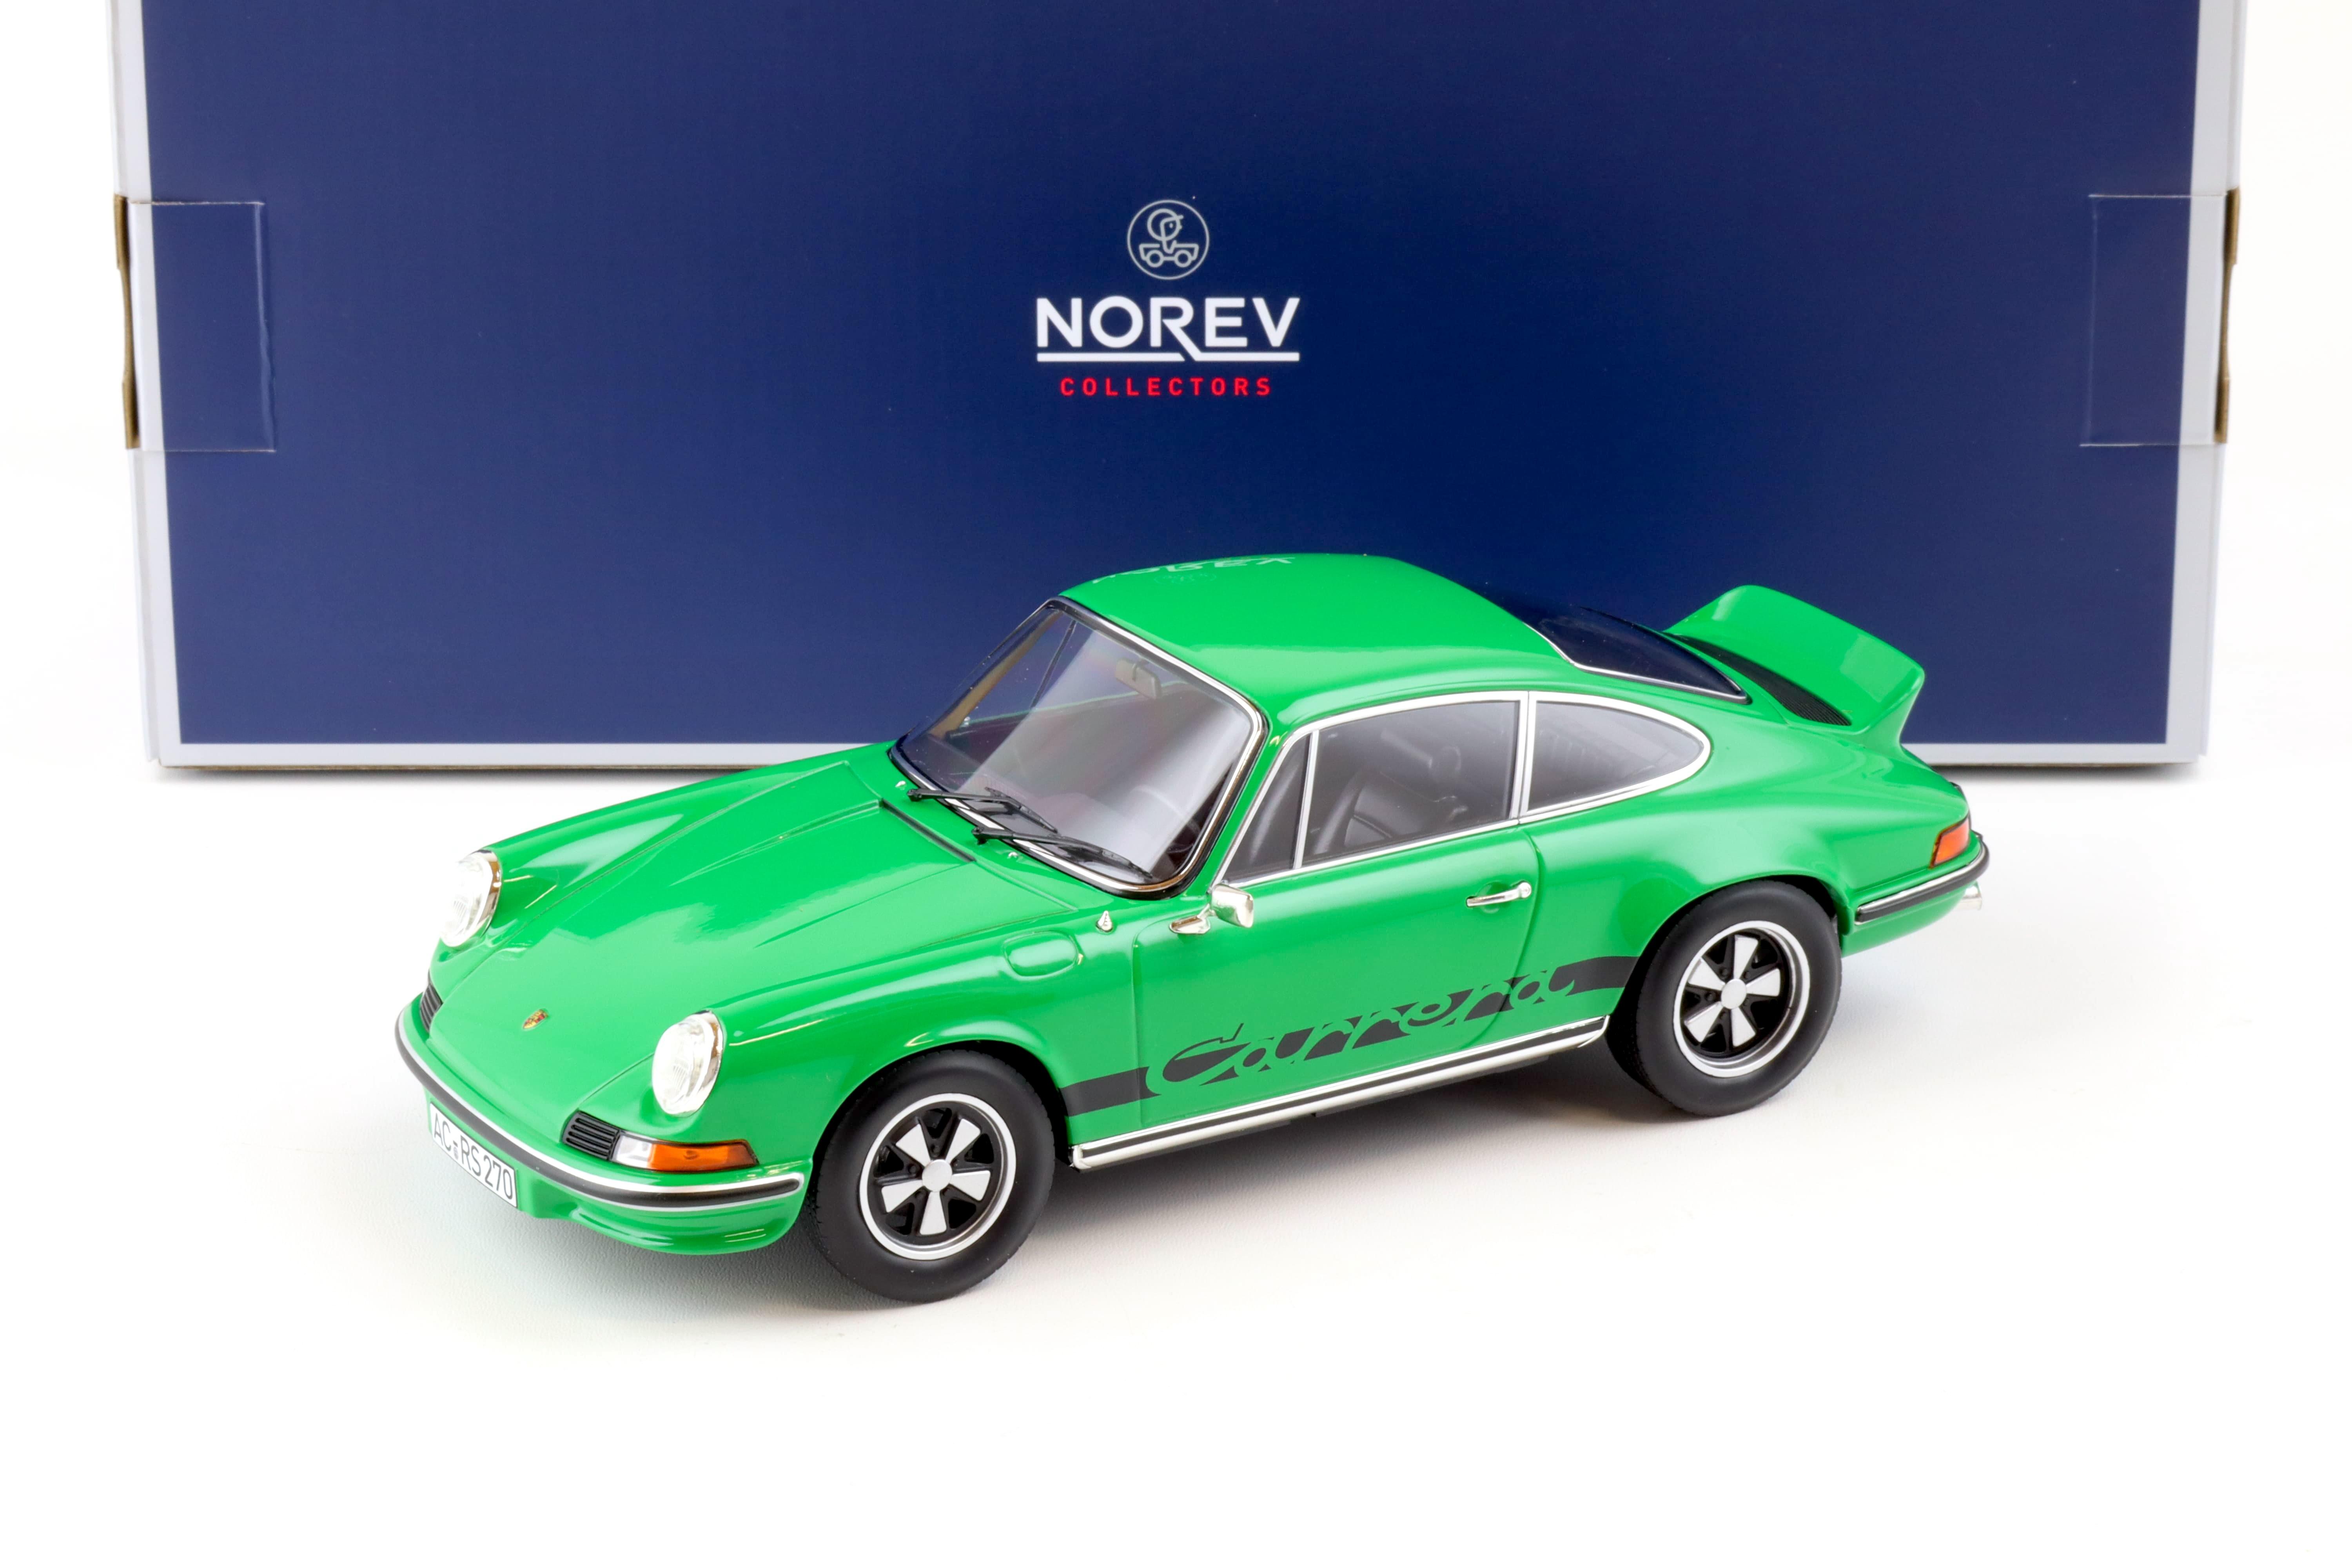 1:18 Norev Porsche 911 RS Touring 1973 green with black stripes